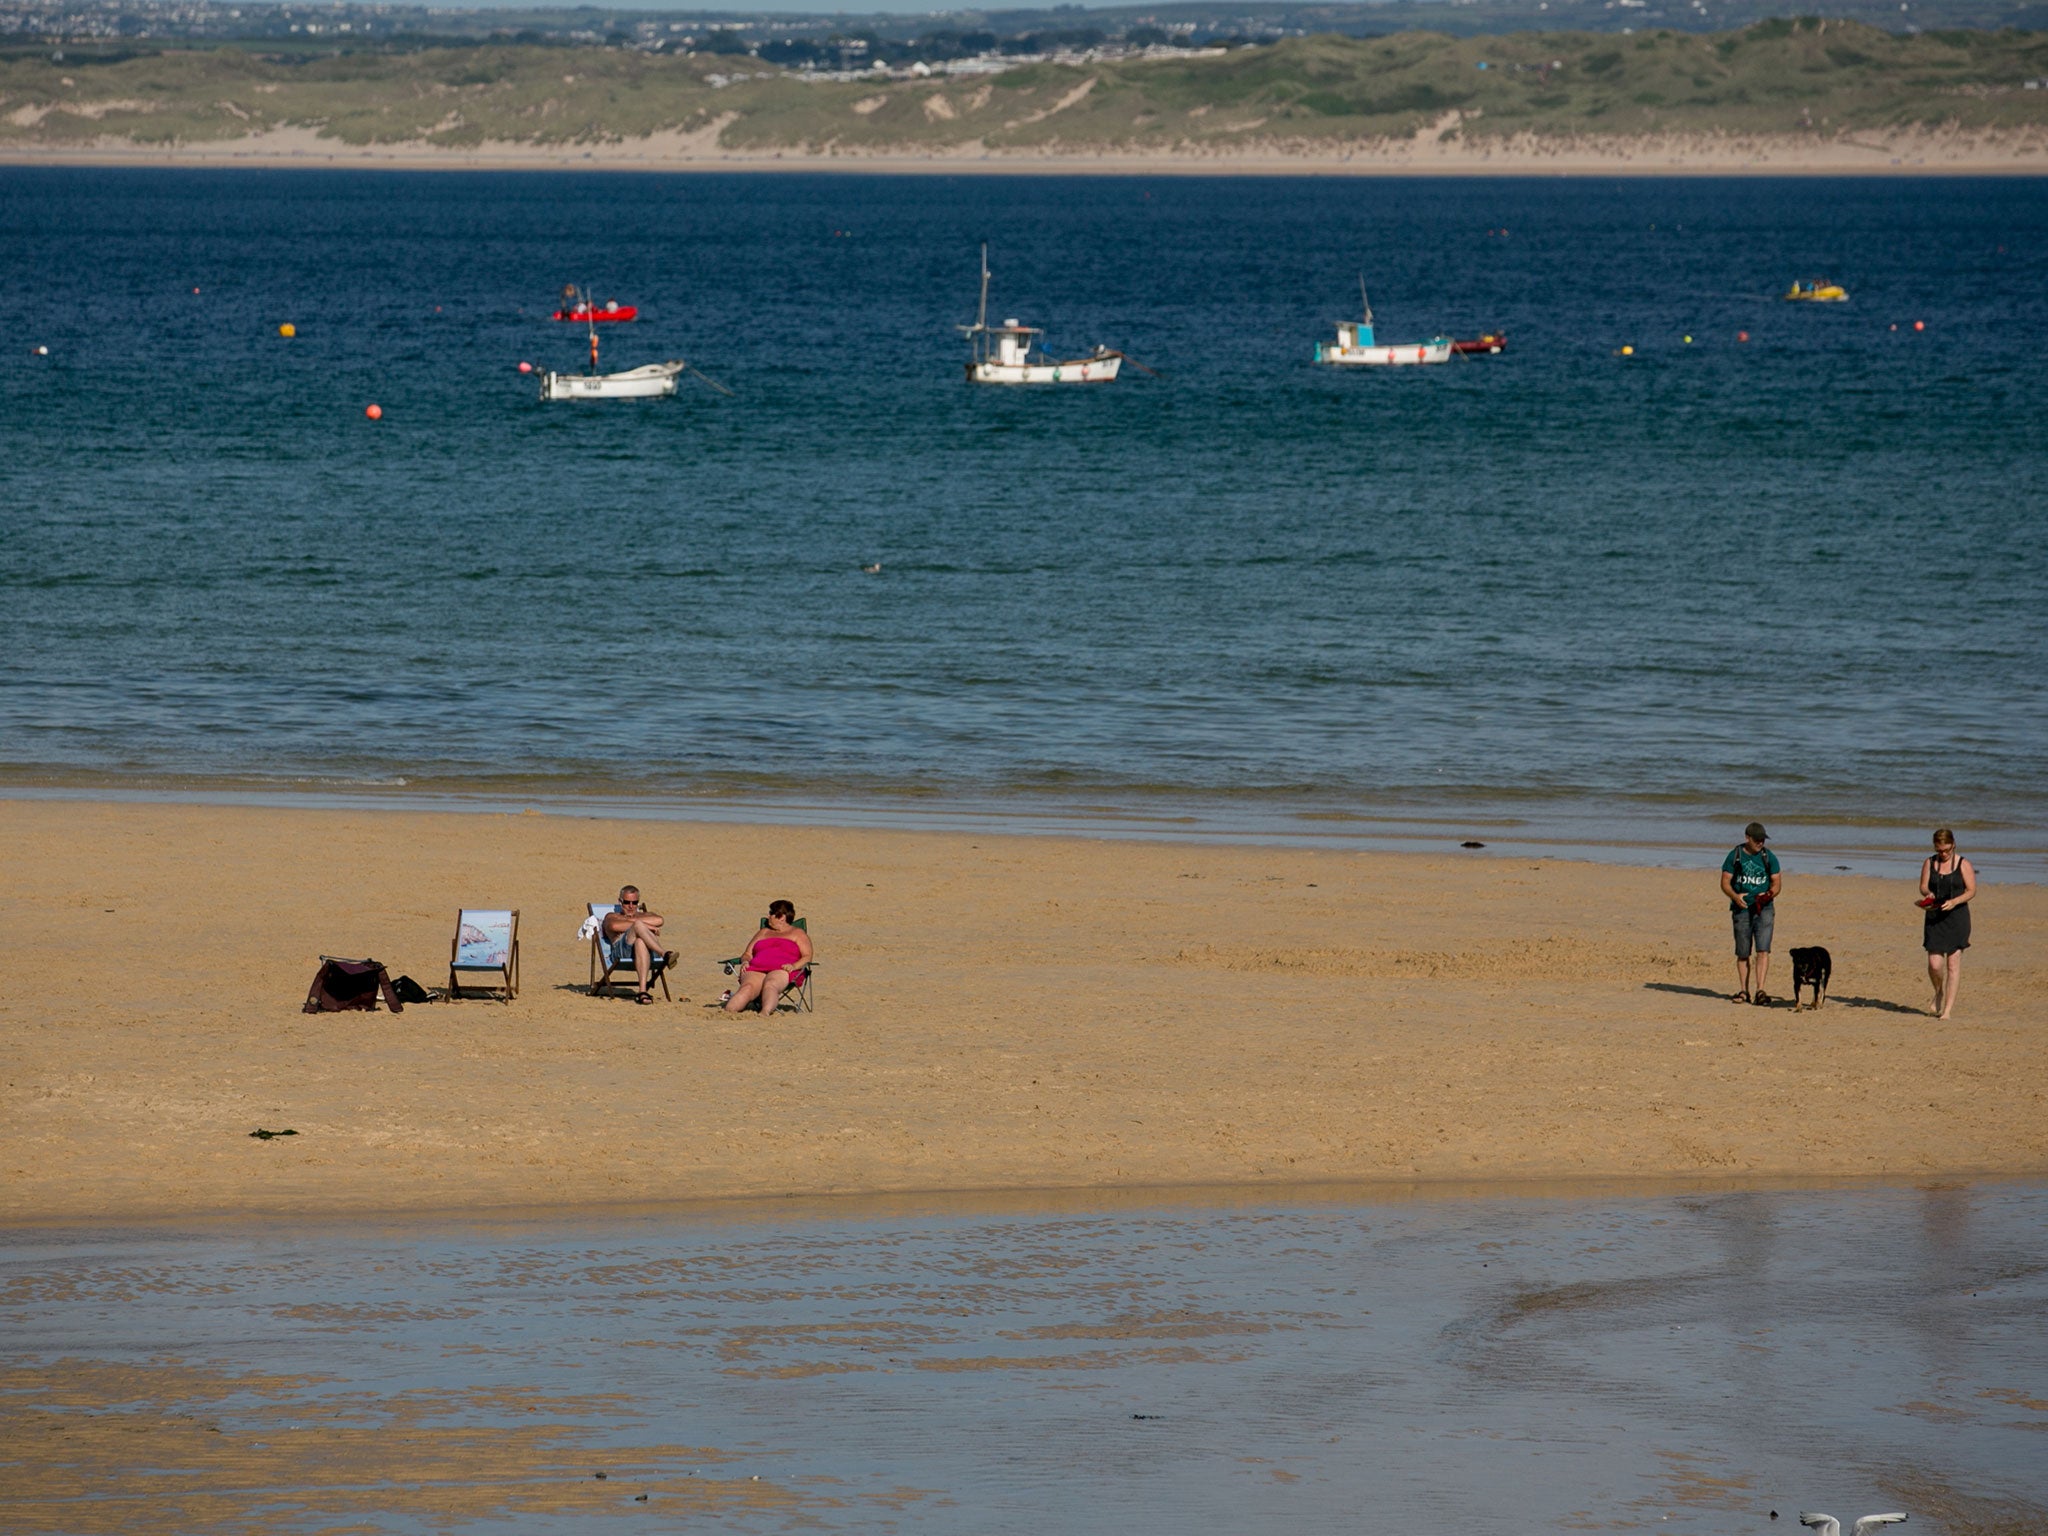 Sunseekers in St Ives before the pandemic